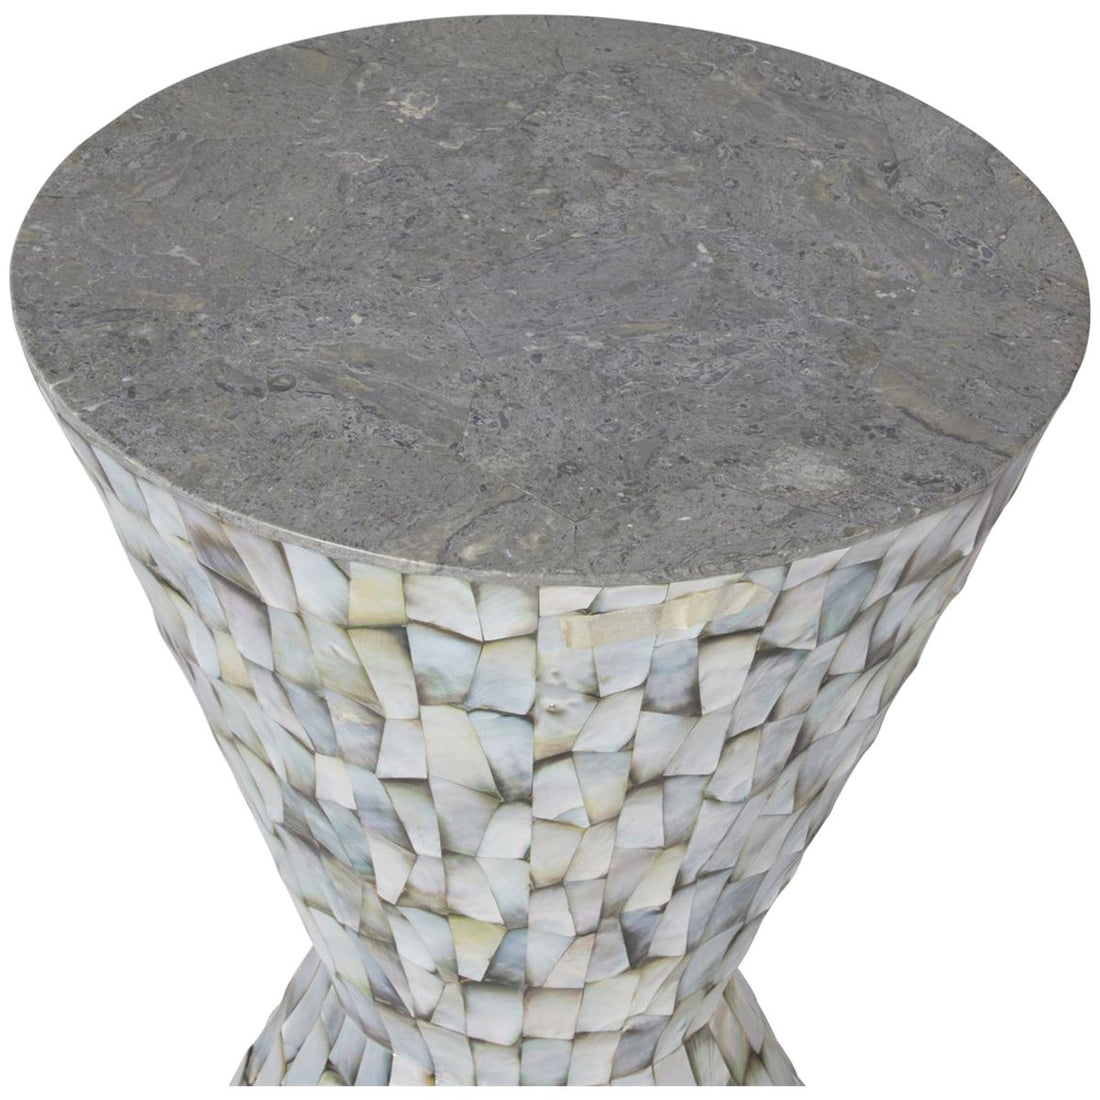 Made Goods Melanie Mop Shell Side Table with Gray Stone Top